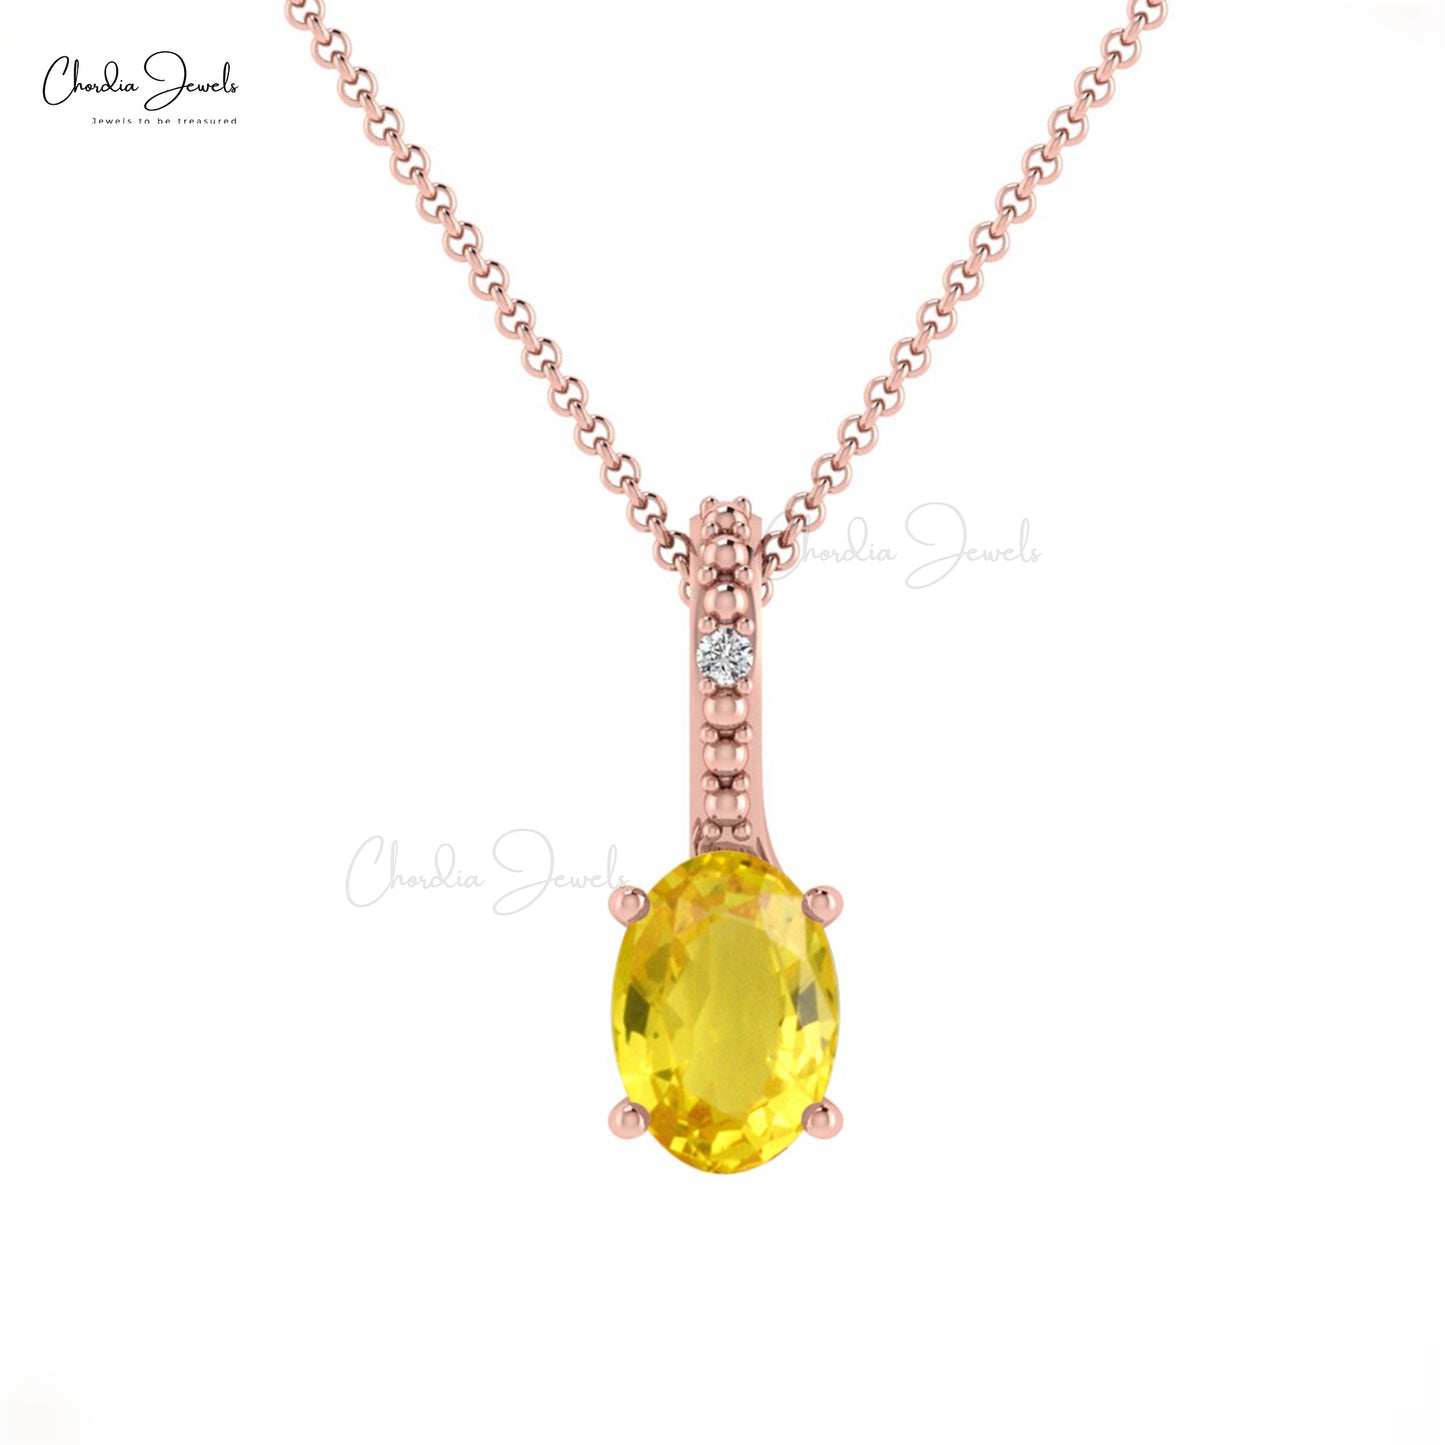 Trendy New Design Natural White Diamond Hidden Bail Pendant Necklace Oval Shape Yellow Sapphire Gemstone Charms Pendant in 14k Pure Gold Gift For Her